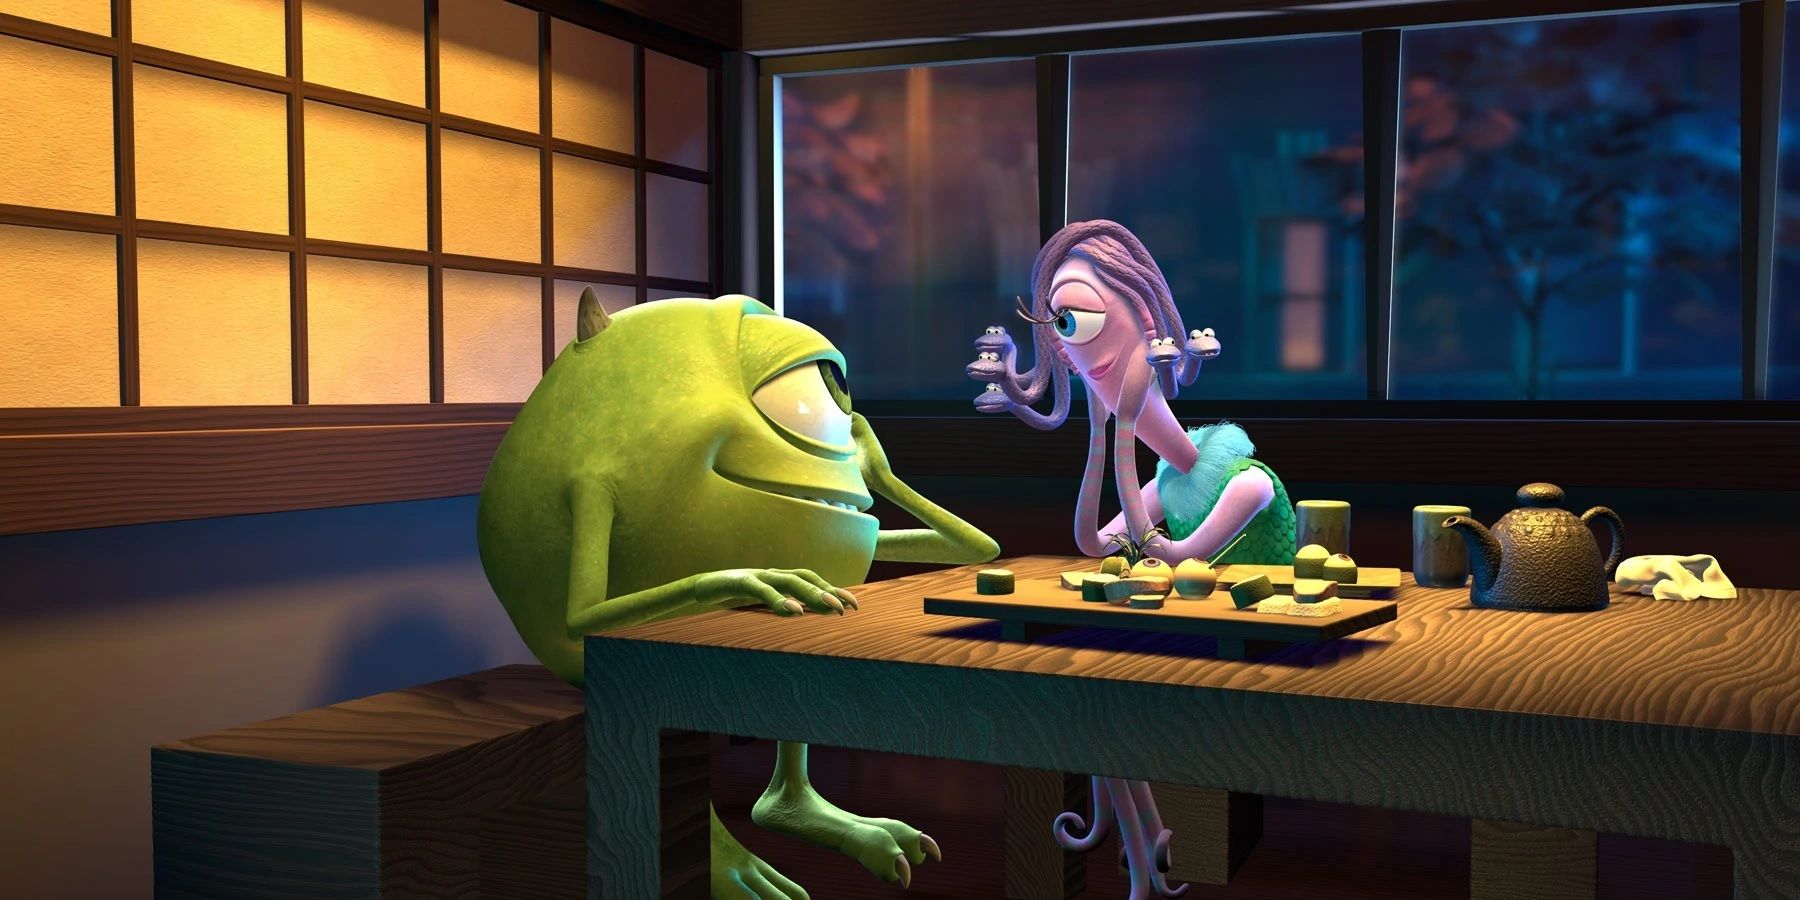 Mike and Celia Mae smile at each other on a date in Monsters, Inc.